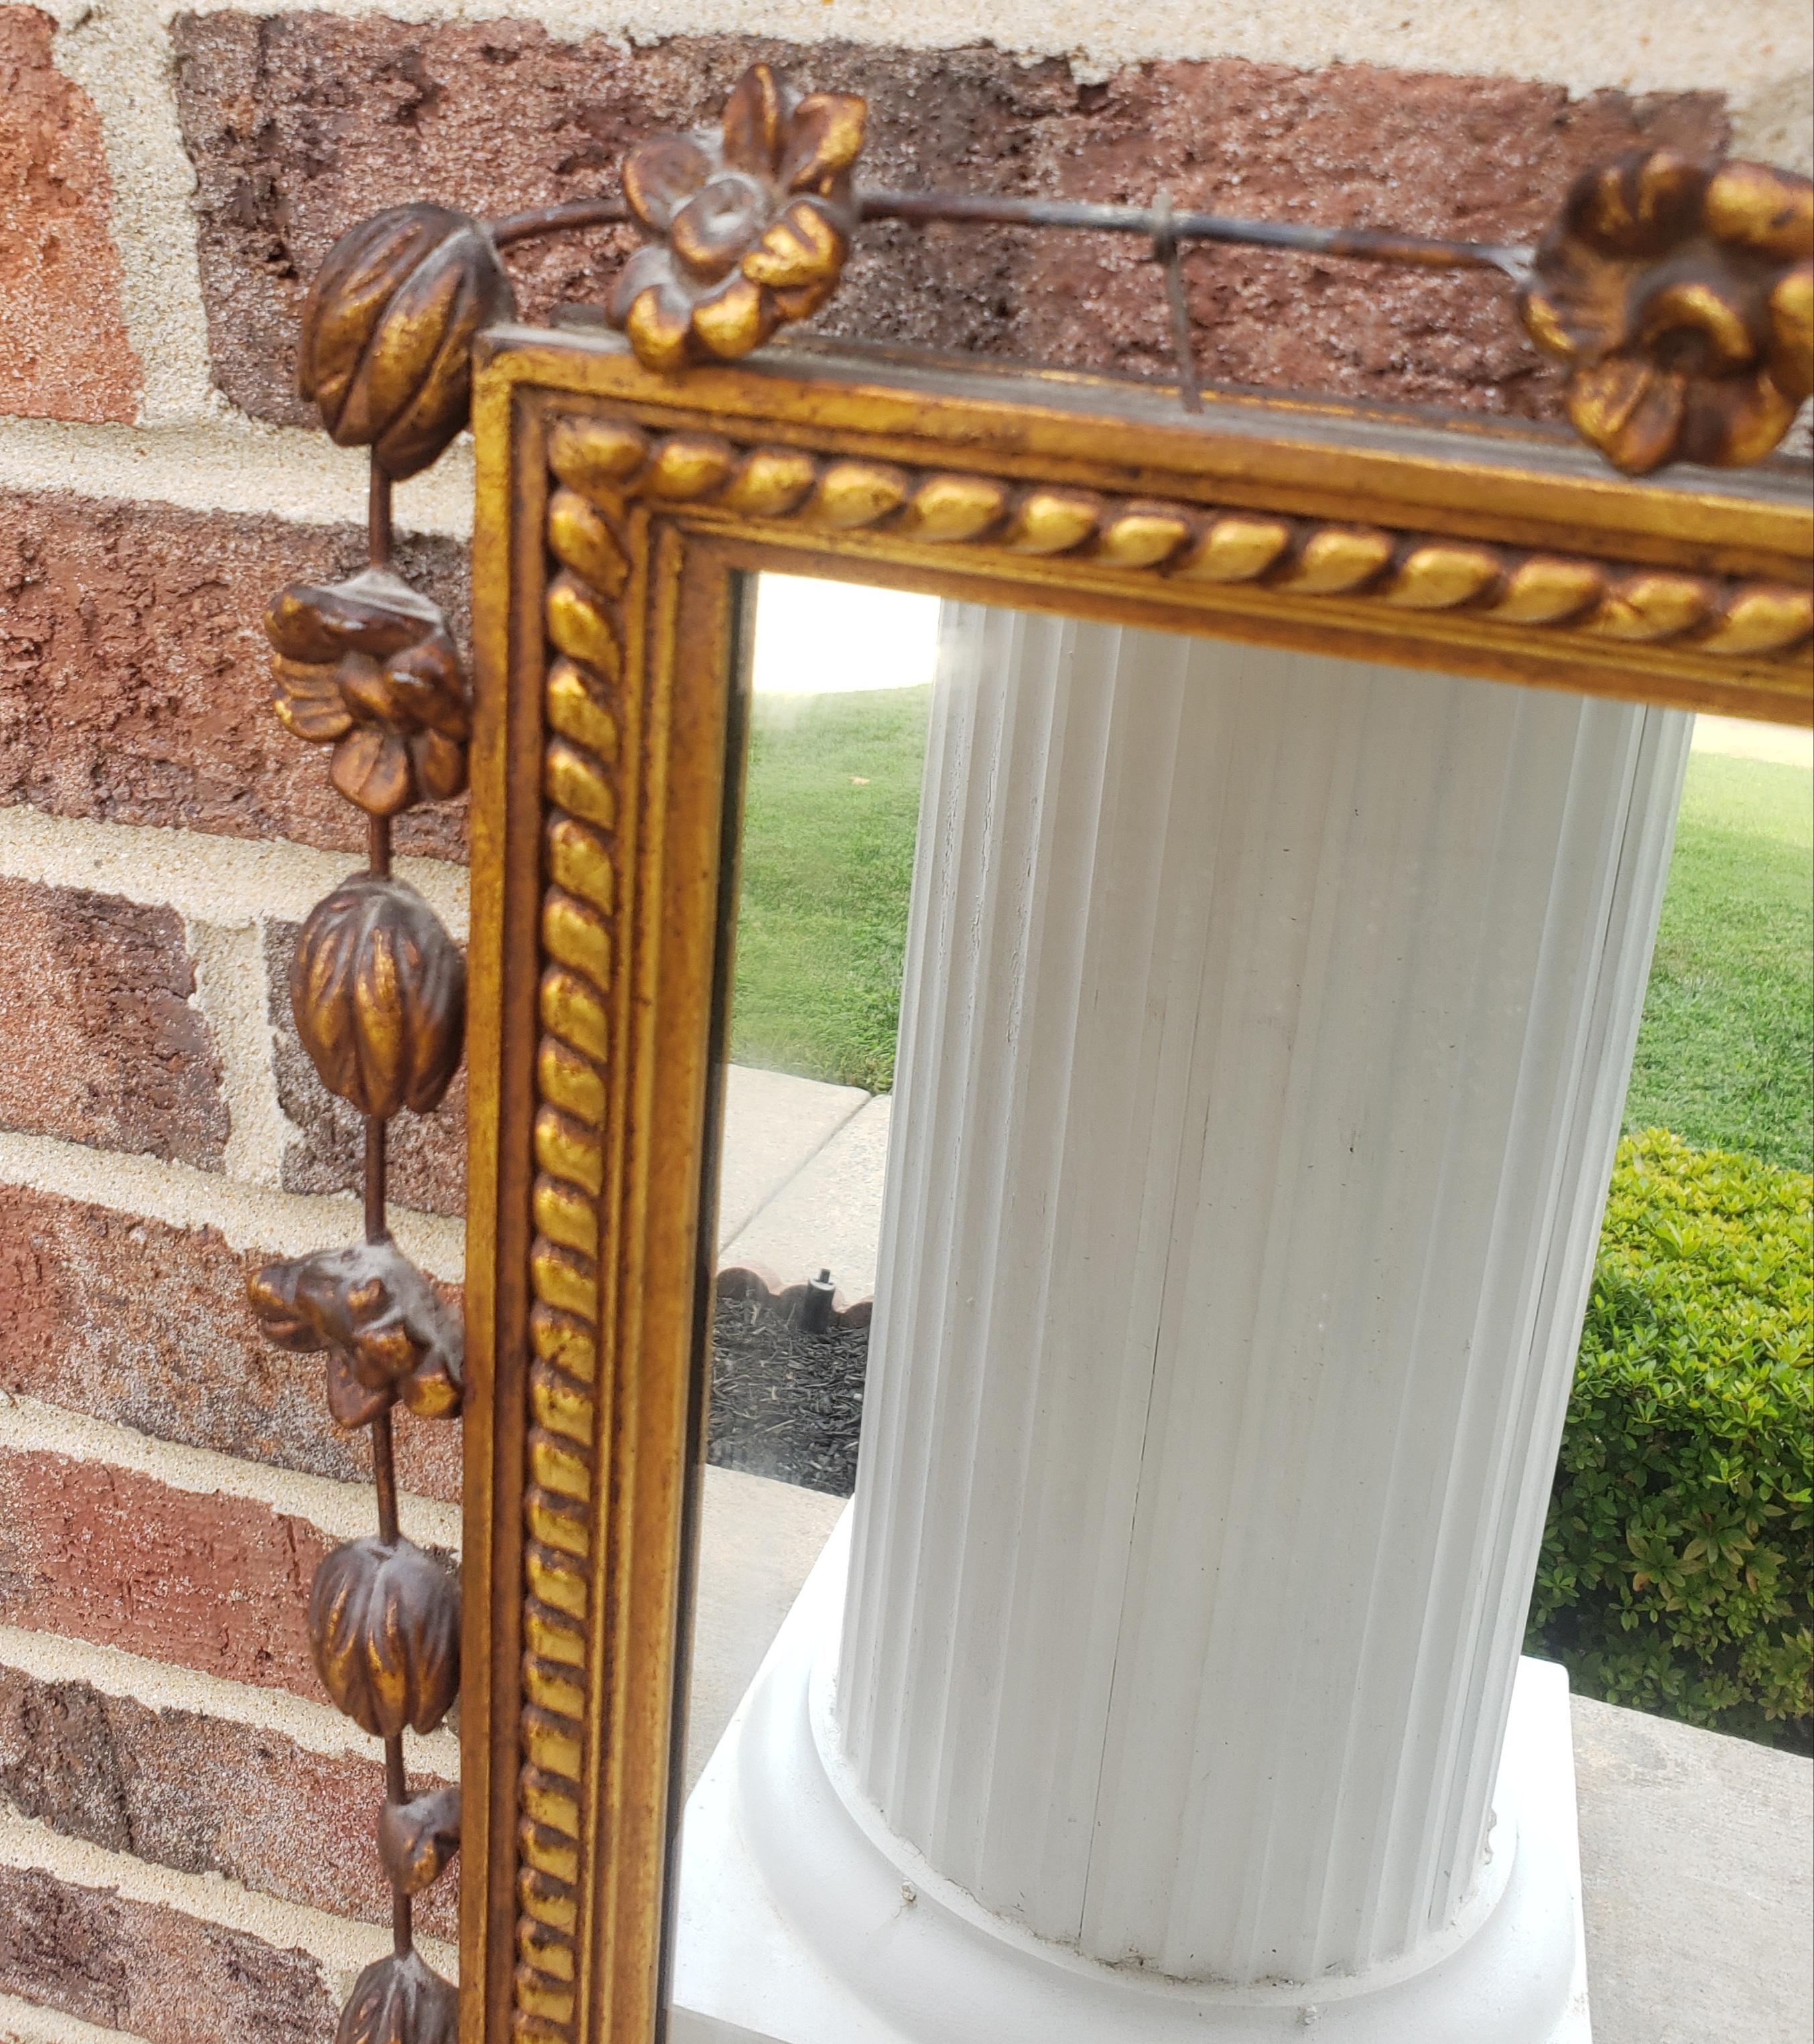 Early 20th Century French Empire Giltwood Frame Ornate Wall Mirror In Good Condition For Sale In Germantown, MD